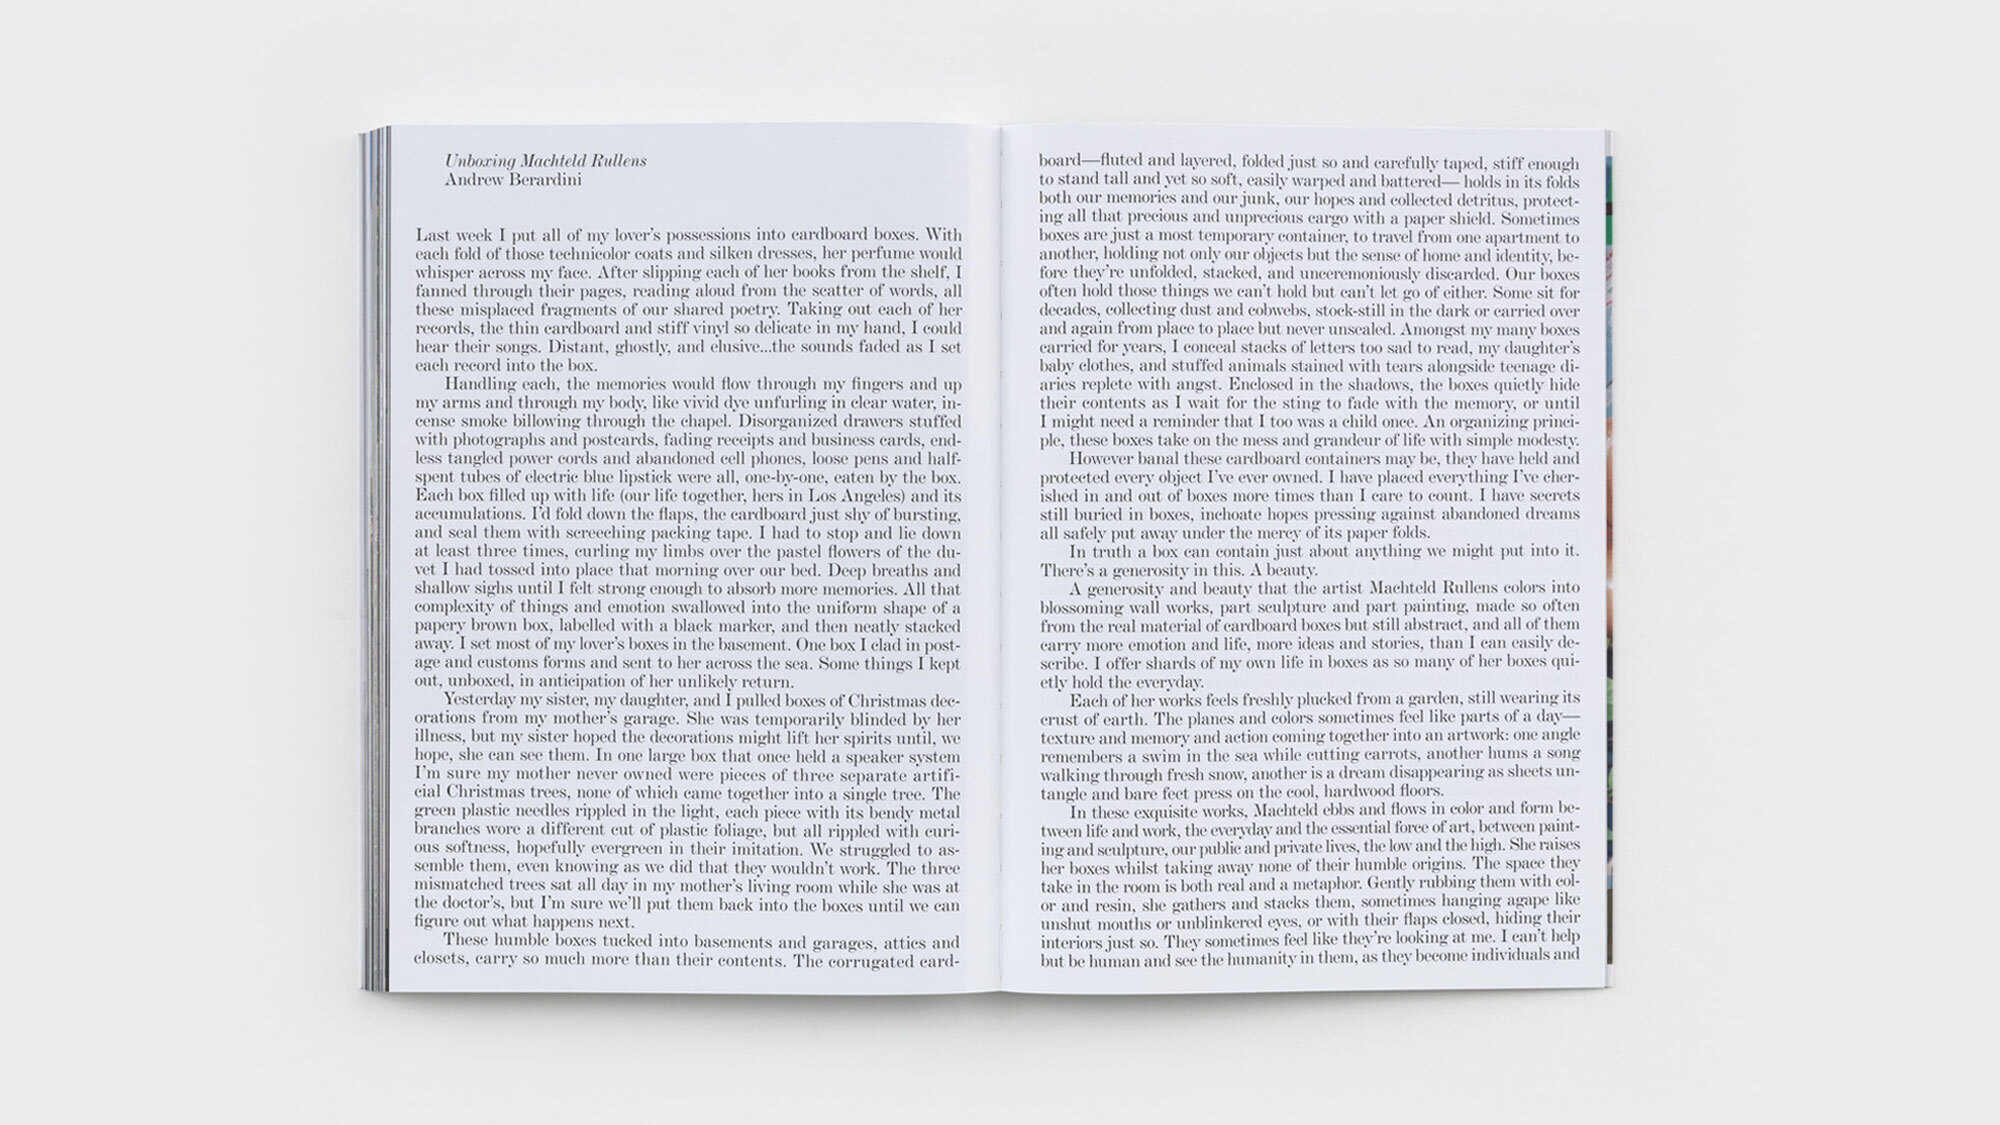 Two full pages of text featuring Andrew Berardini's essay Unboxing Machteld Rullens. The type reaches to all edges of the paper.'